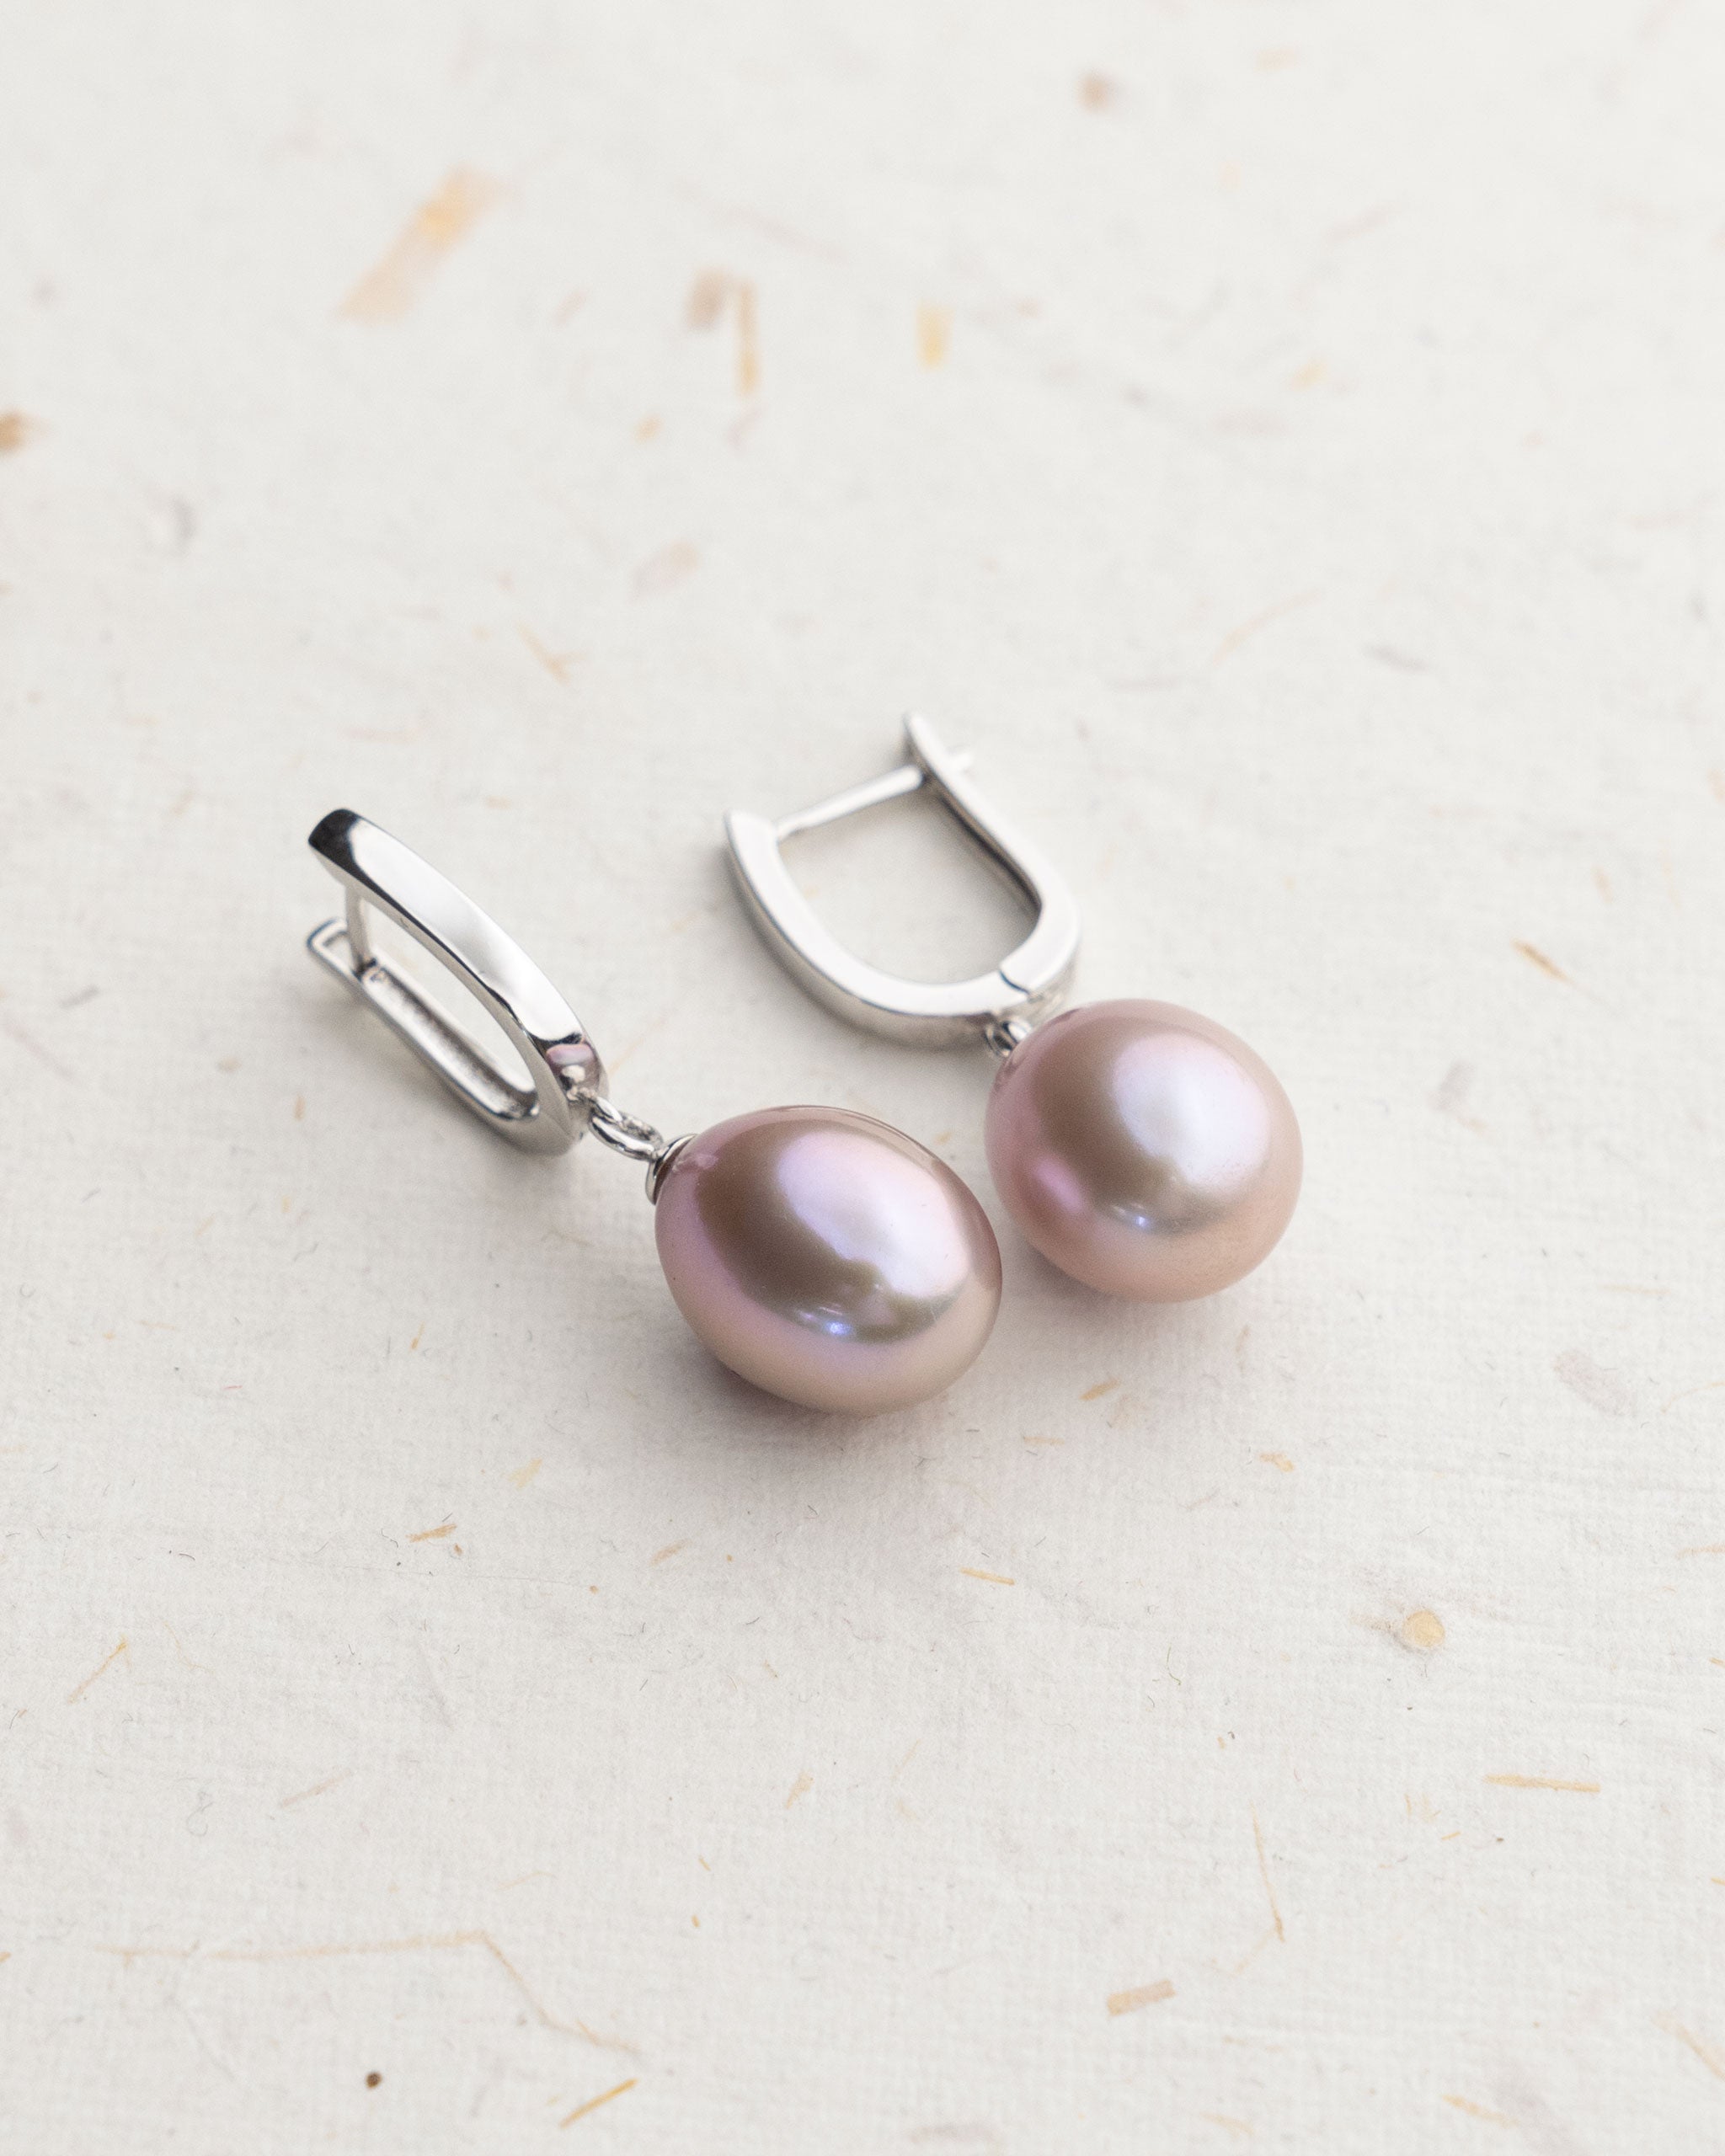 Freshwater Pearl Earrings 10-11mm Drop type Lavender color with Sterling Silver